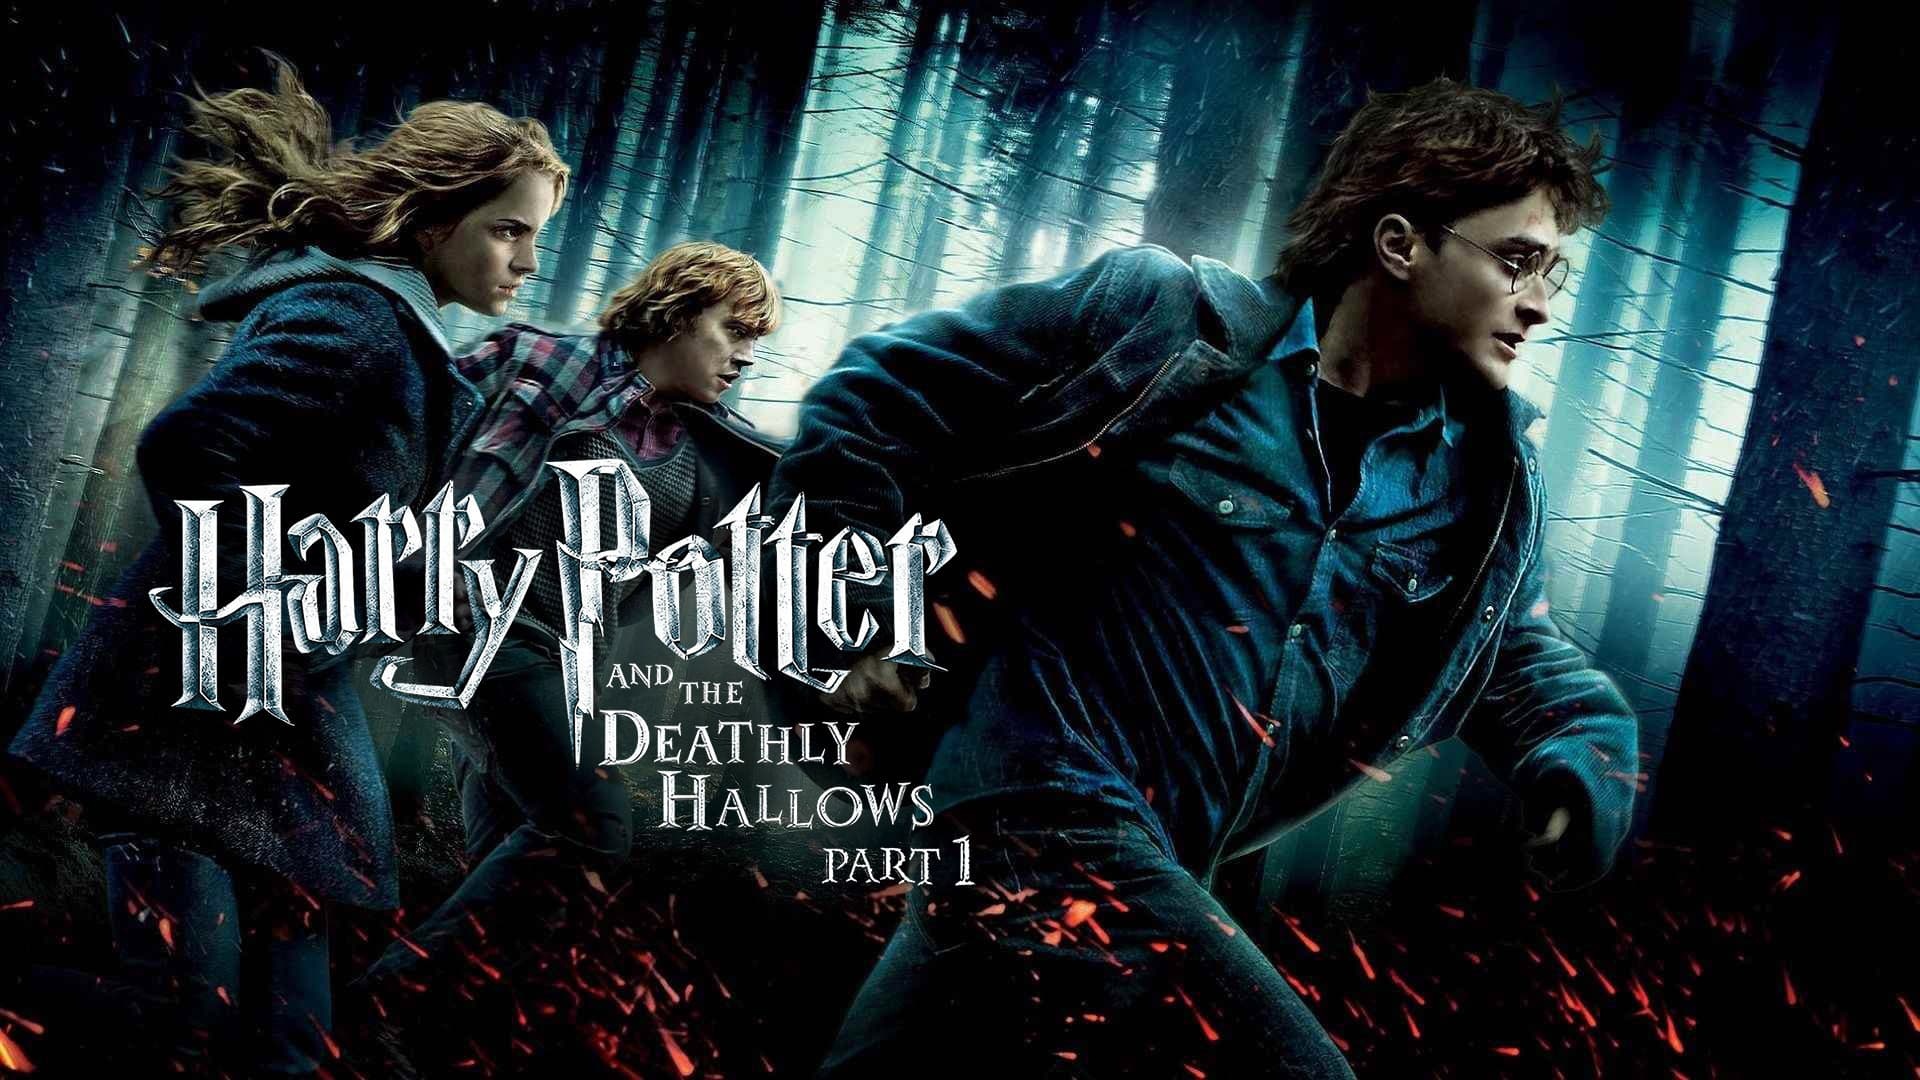 David Yates movies, Deathly Hallows purchase, Microsoft store offer, Complete collection, 1920x1080 Full HD Desktop